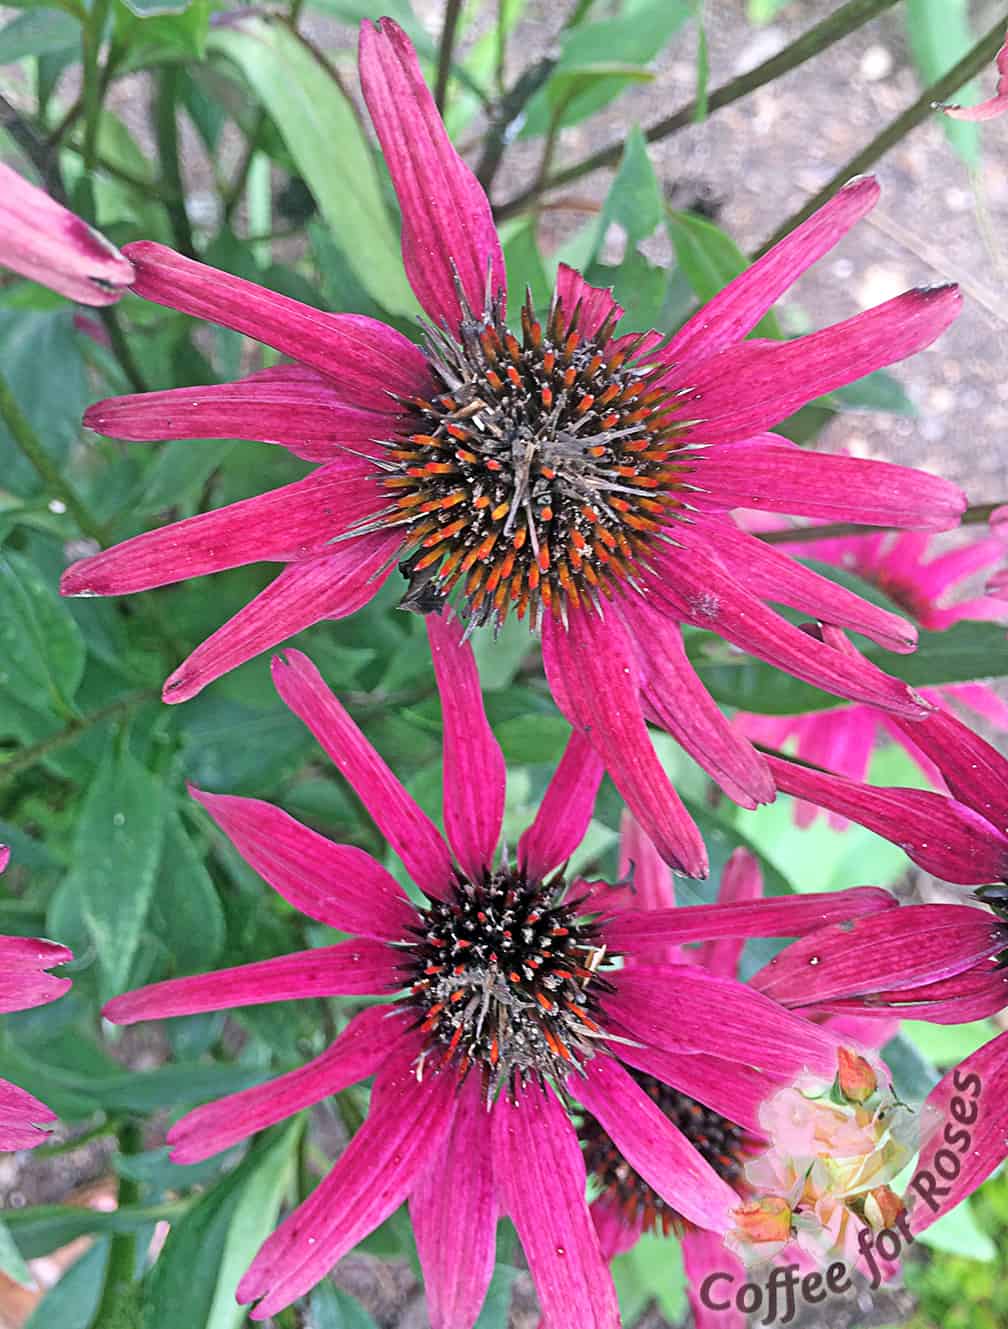 As the larvae feed they push their poop, also known as frass, out of the cone. Suspect that you have this pest if the cones of your Echinacea look muddy, dirty or have blackened areas.